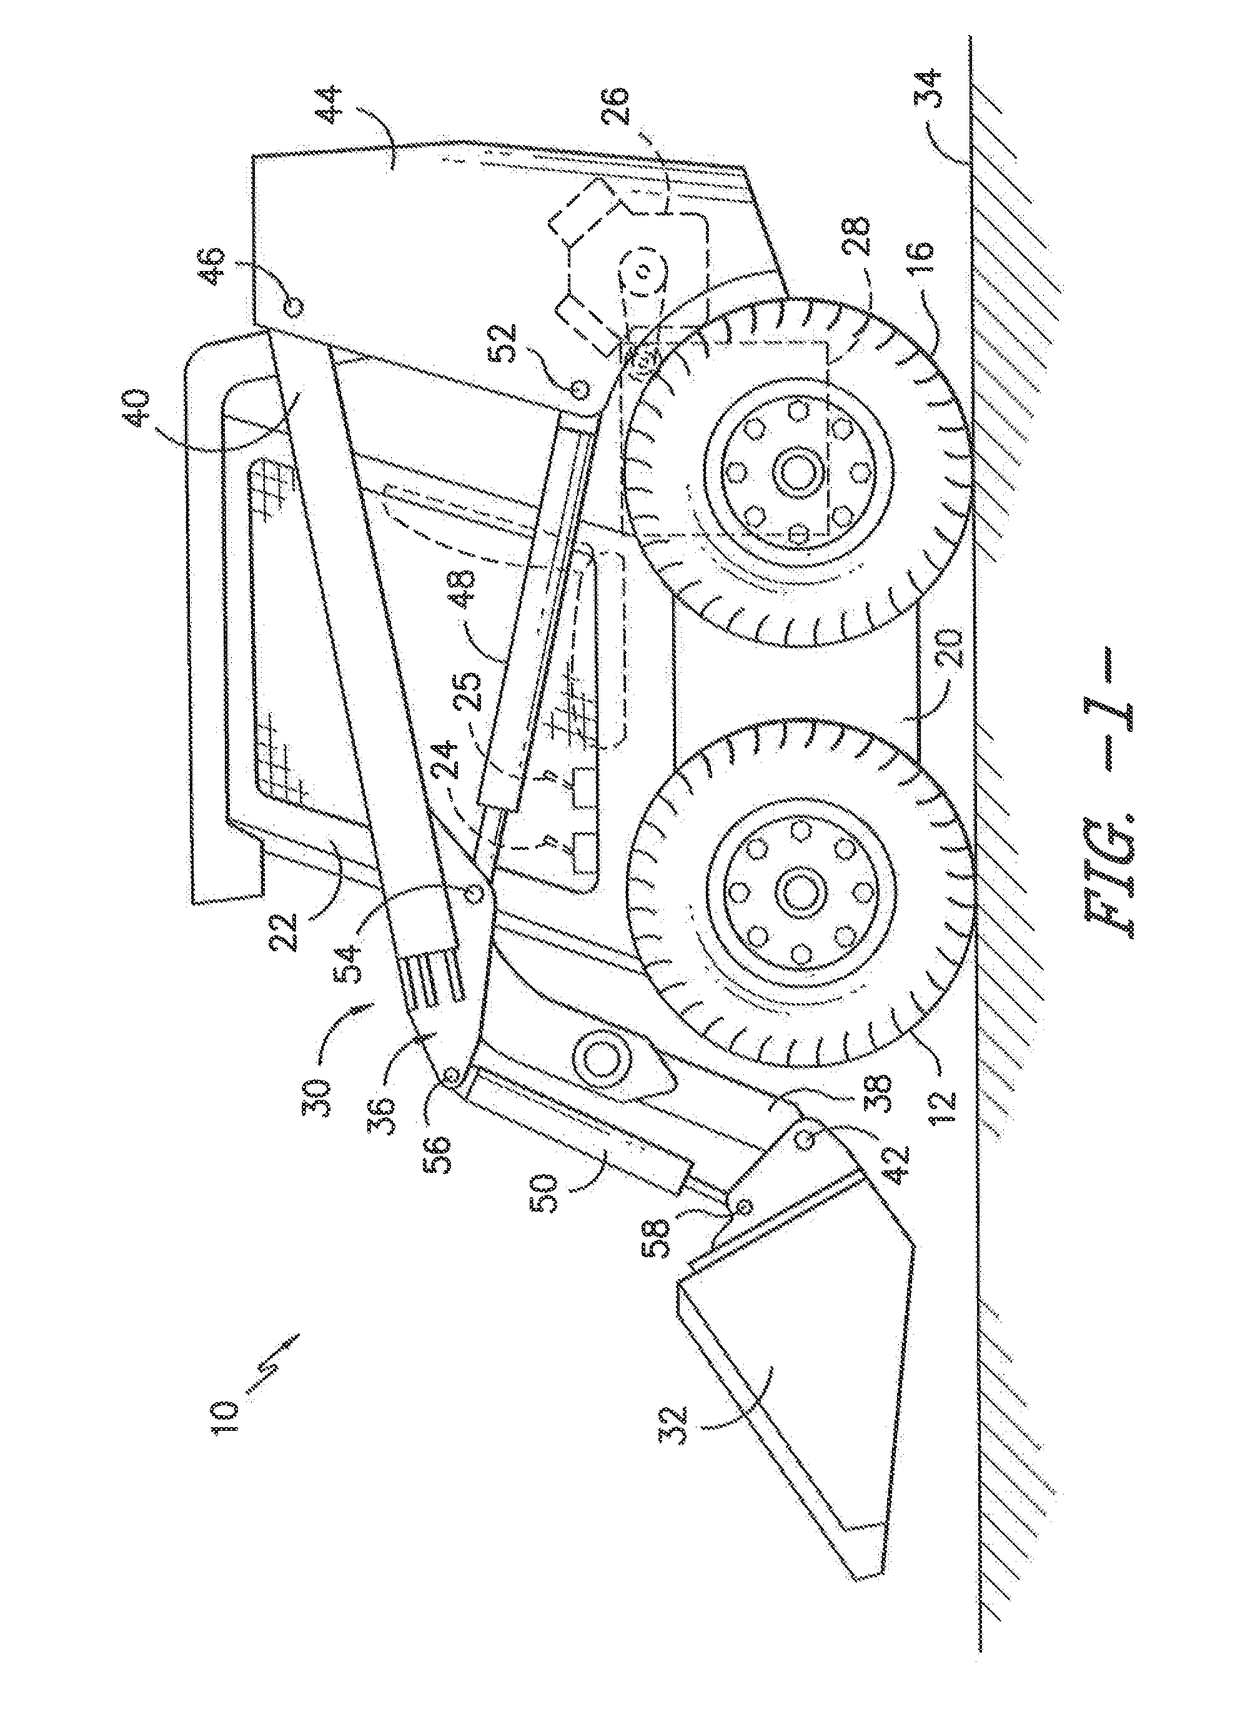 Work vehicle with enhanced implement position control and bi-directional self-leveling functionality